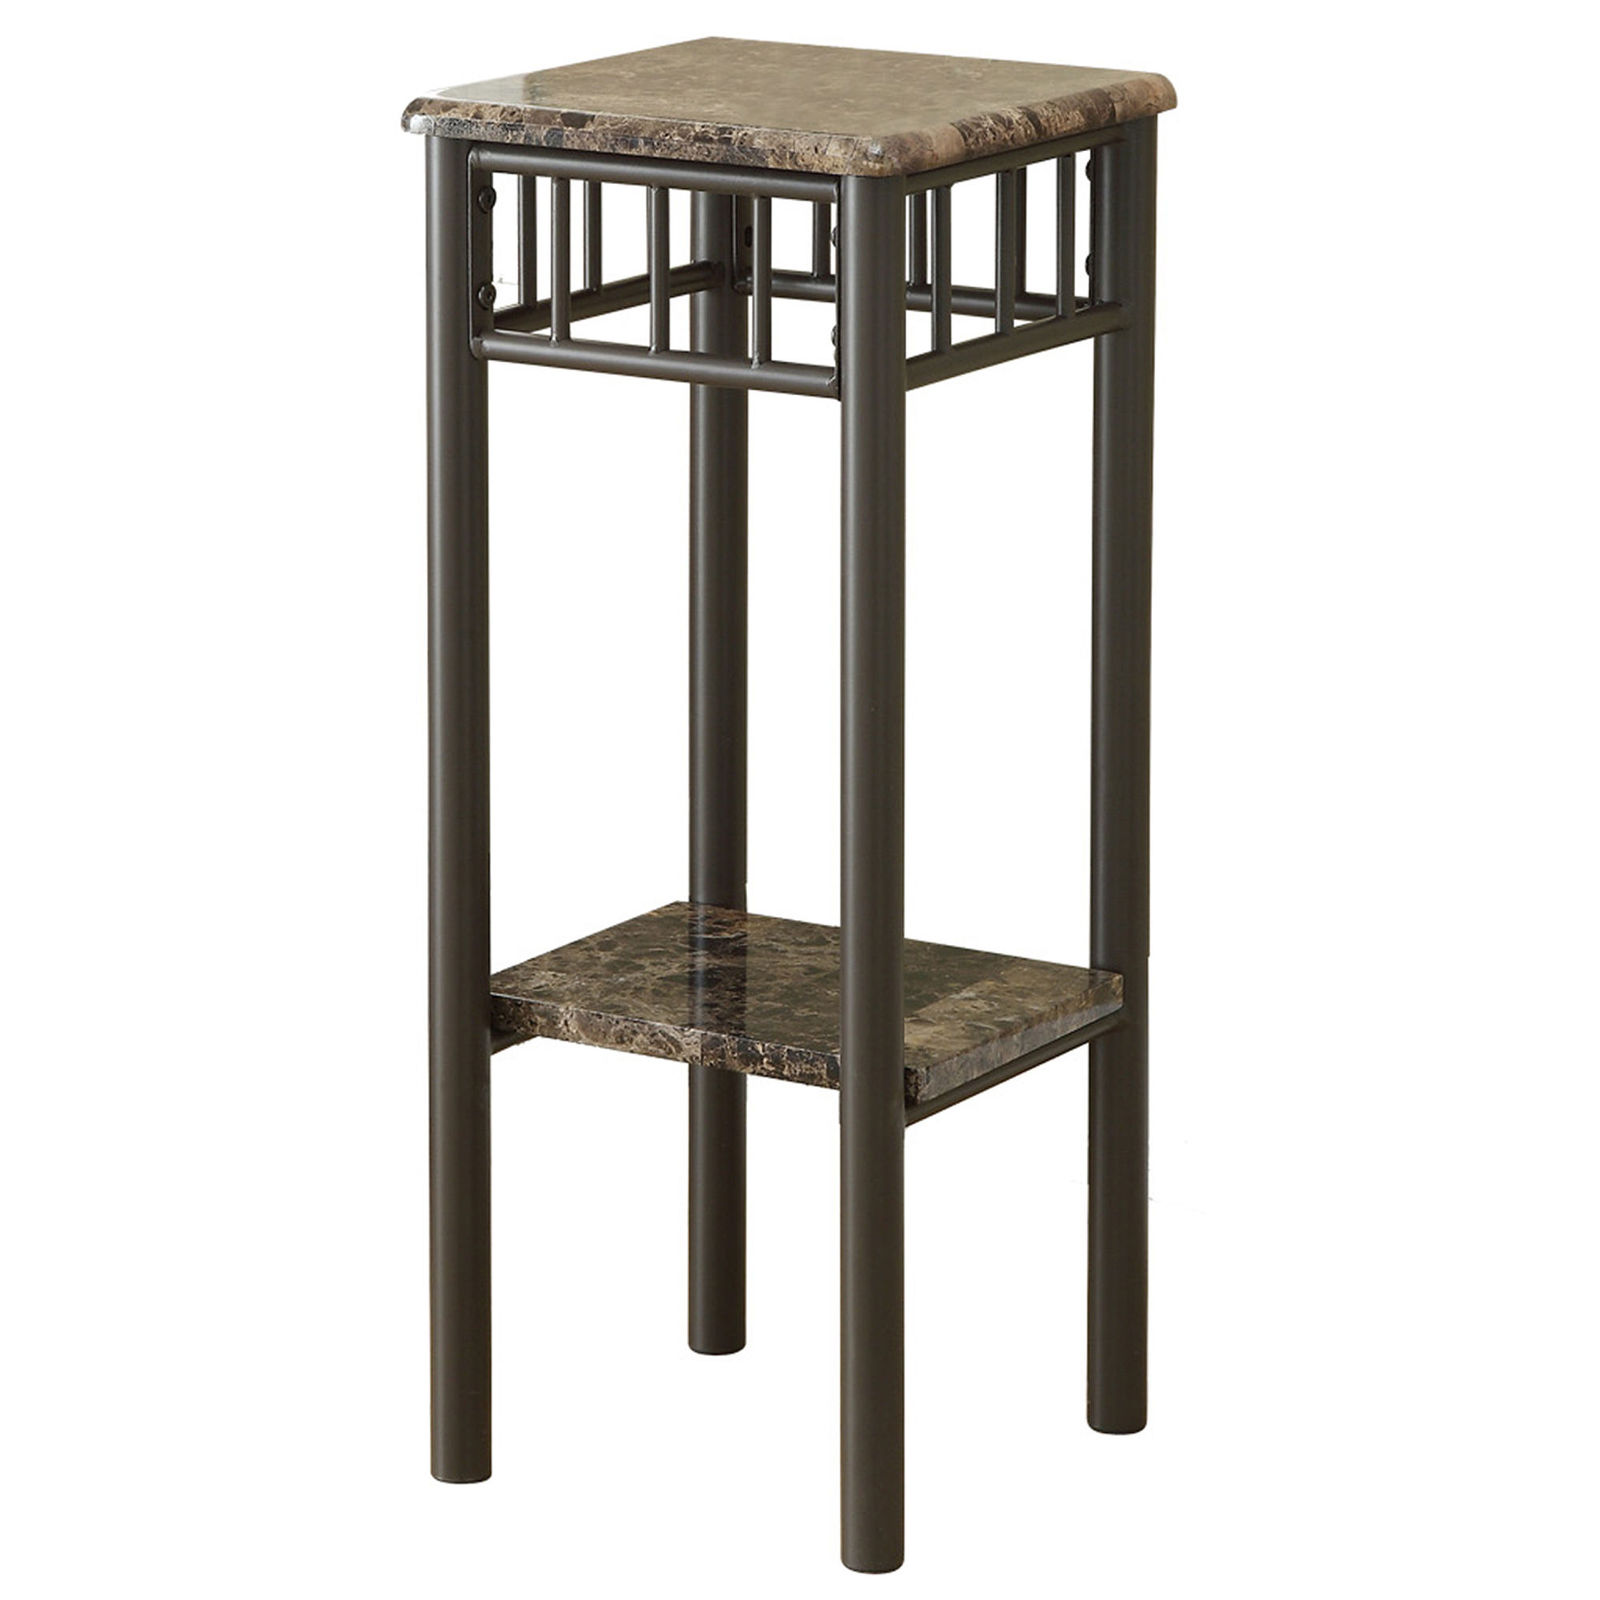 12 x 12 x 28 Cappuccino Mdf Metal  Accent Table